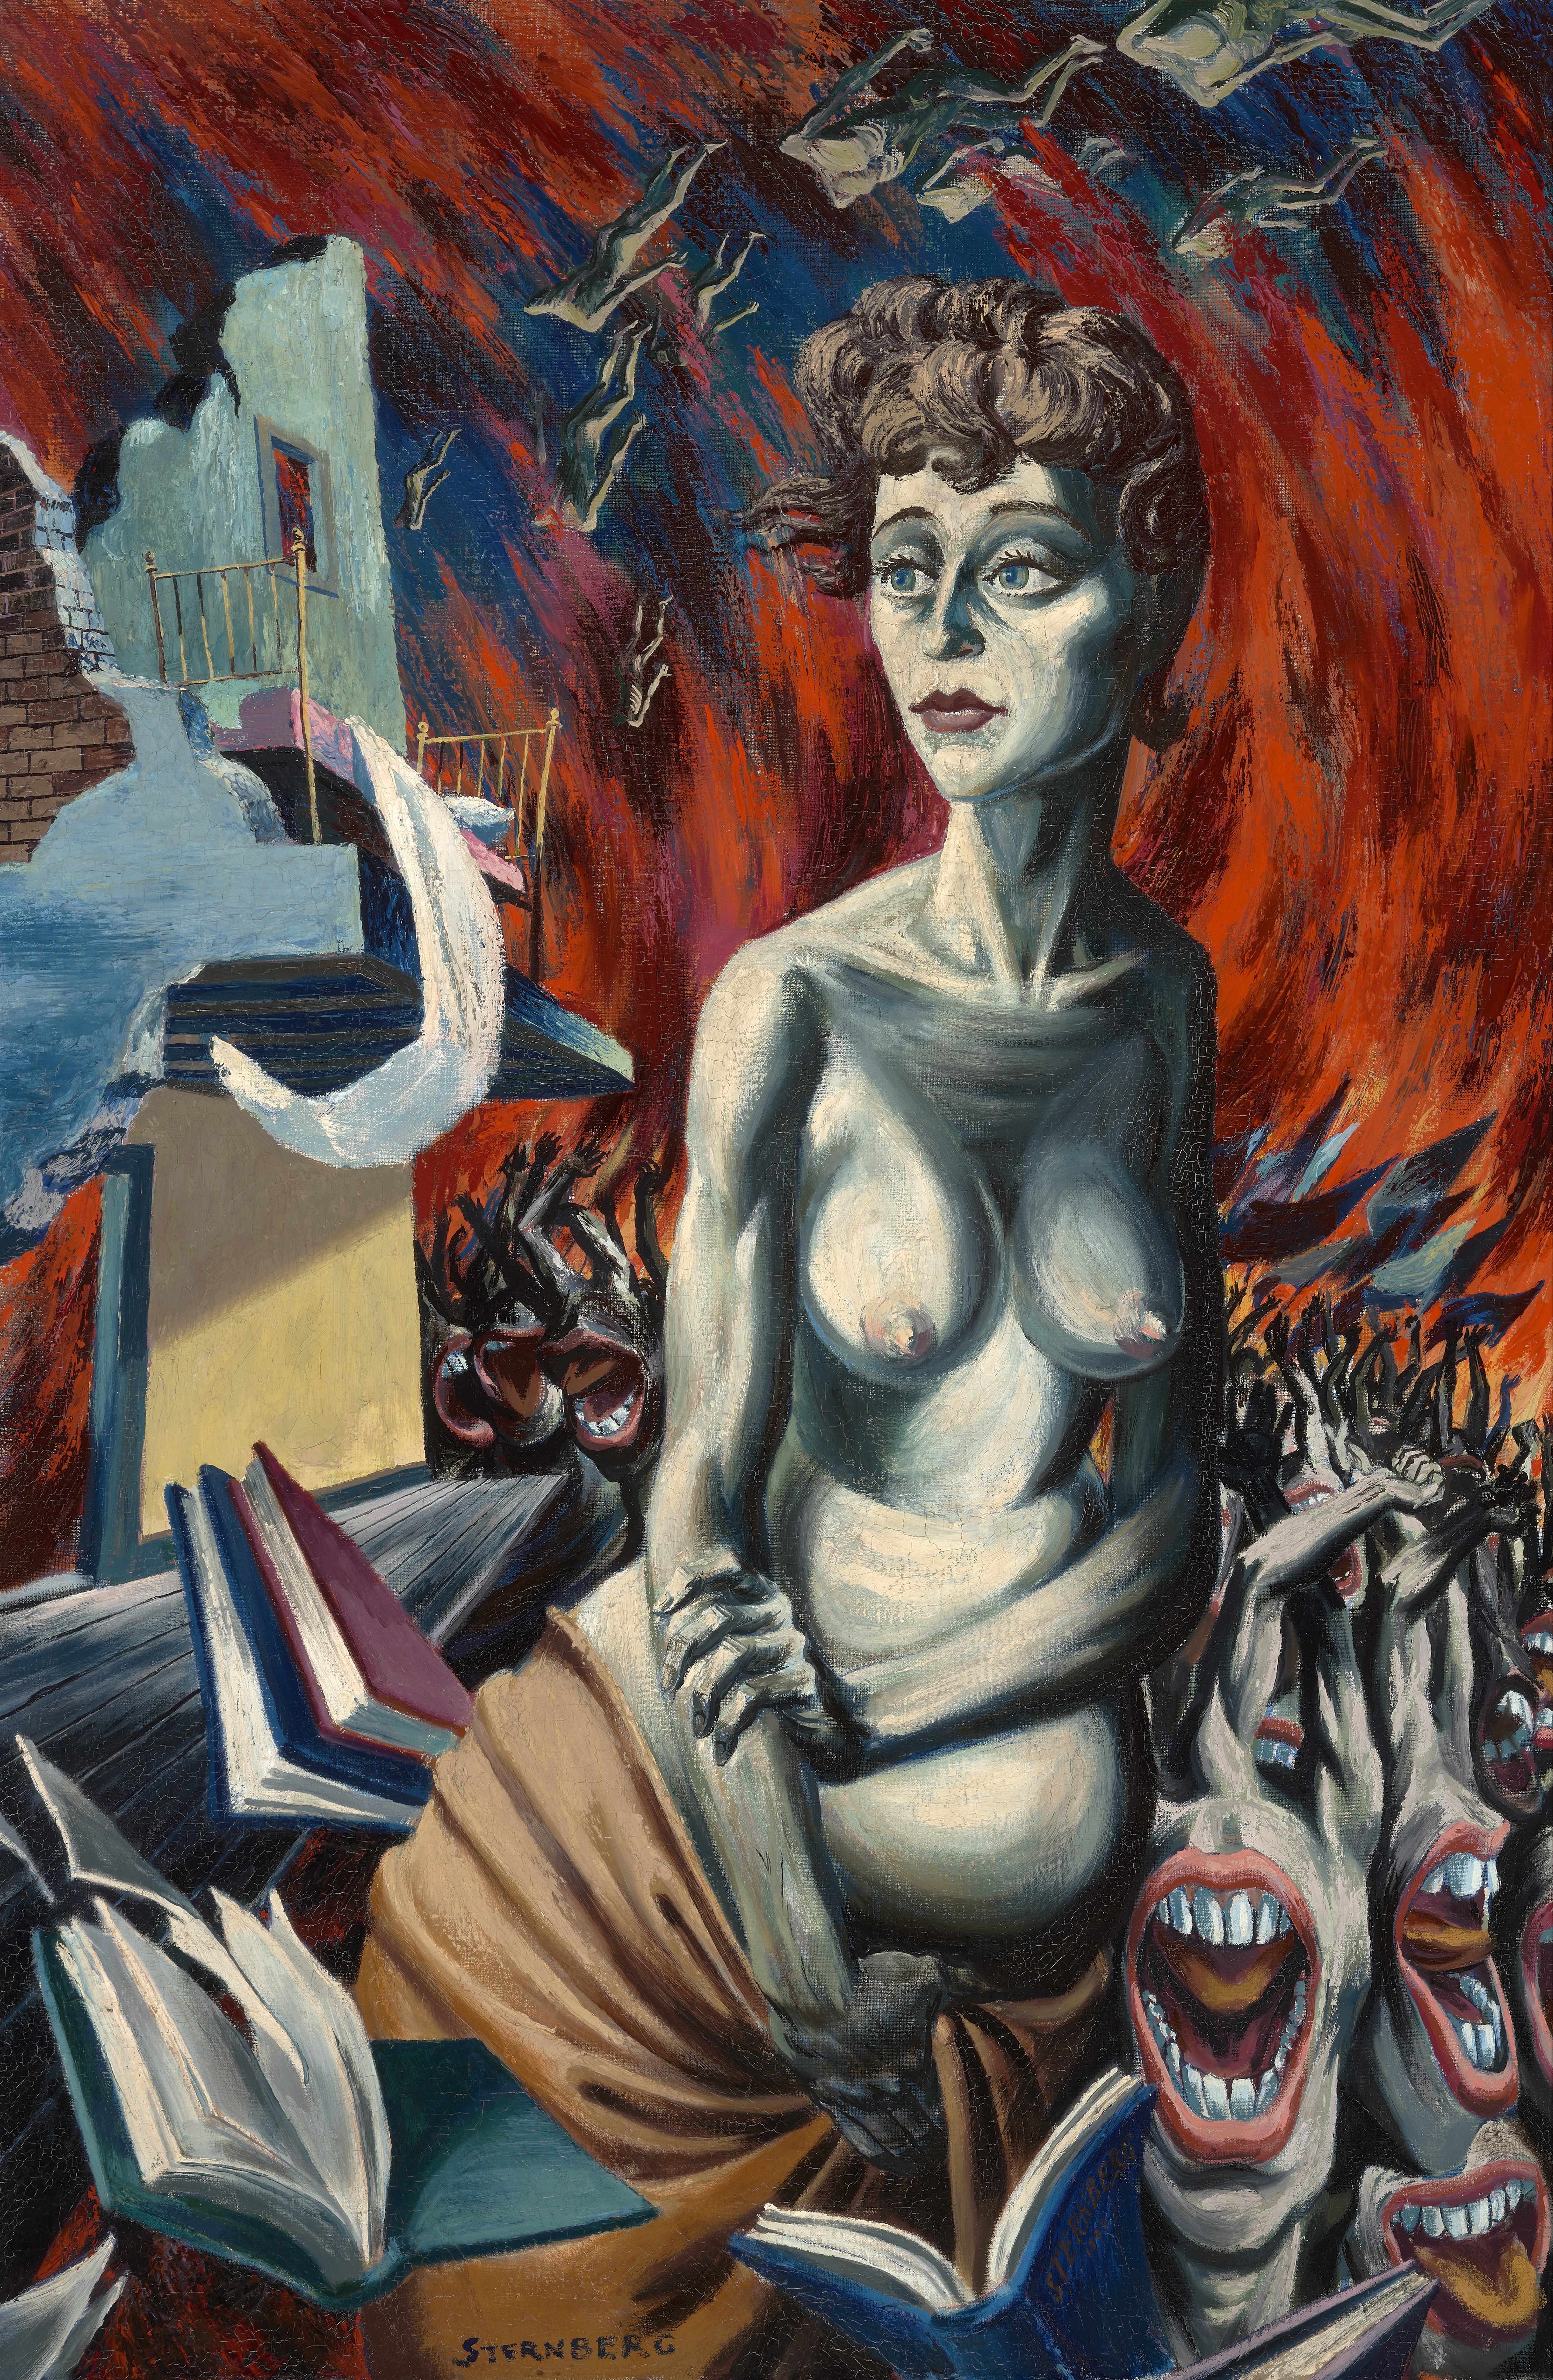 Harry Sternberg (1904-2001), Woman and War, 1940. Oil on panel, 48" x 32". From the collection of Sandra and Bram Dijkstra.